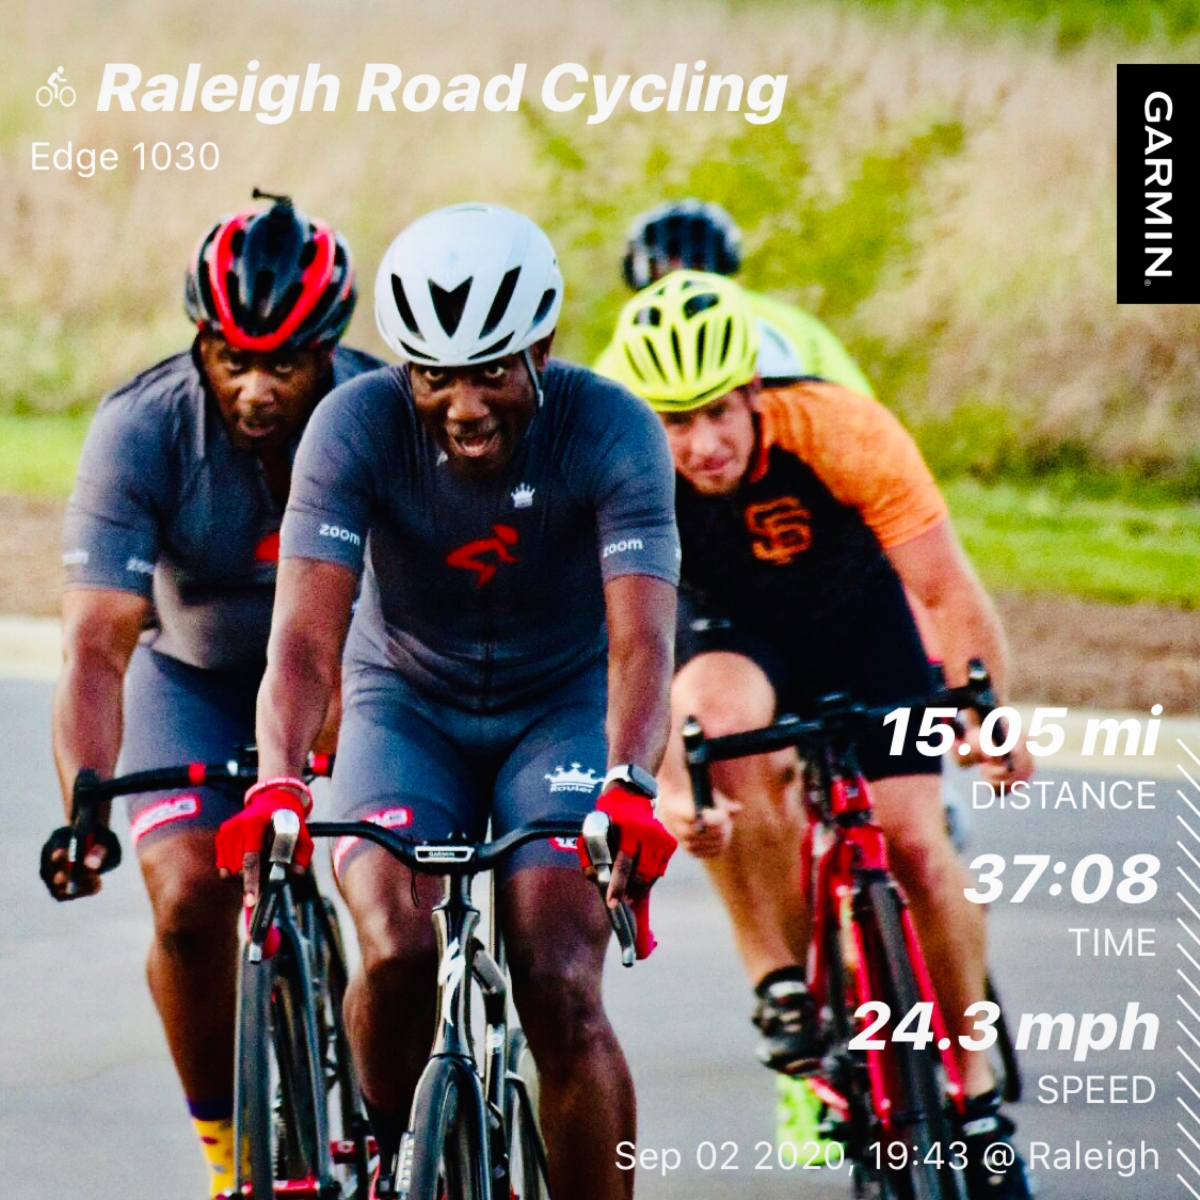 Tony W. Raleigh road cycling